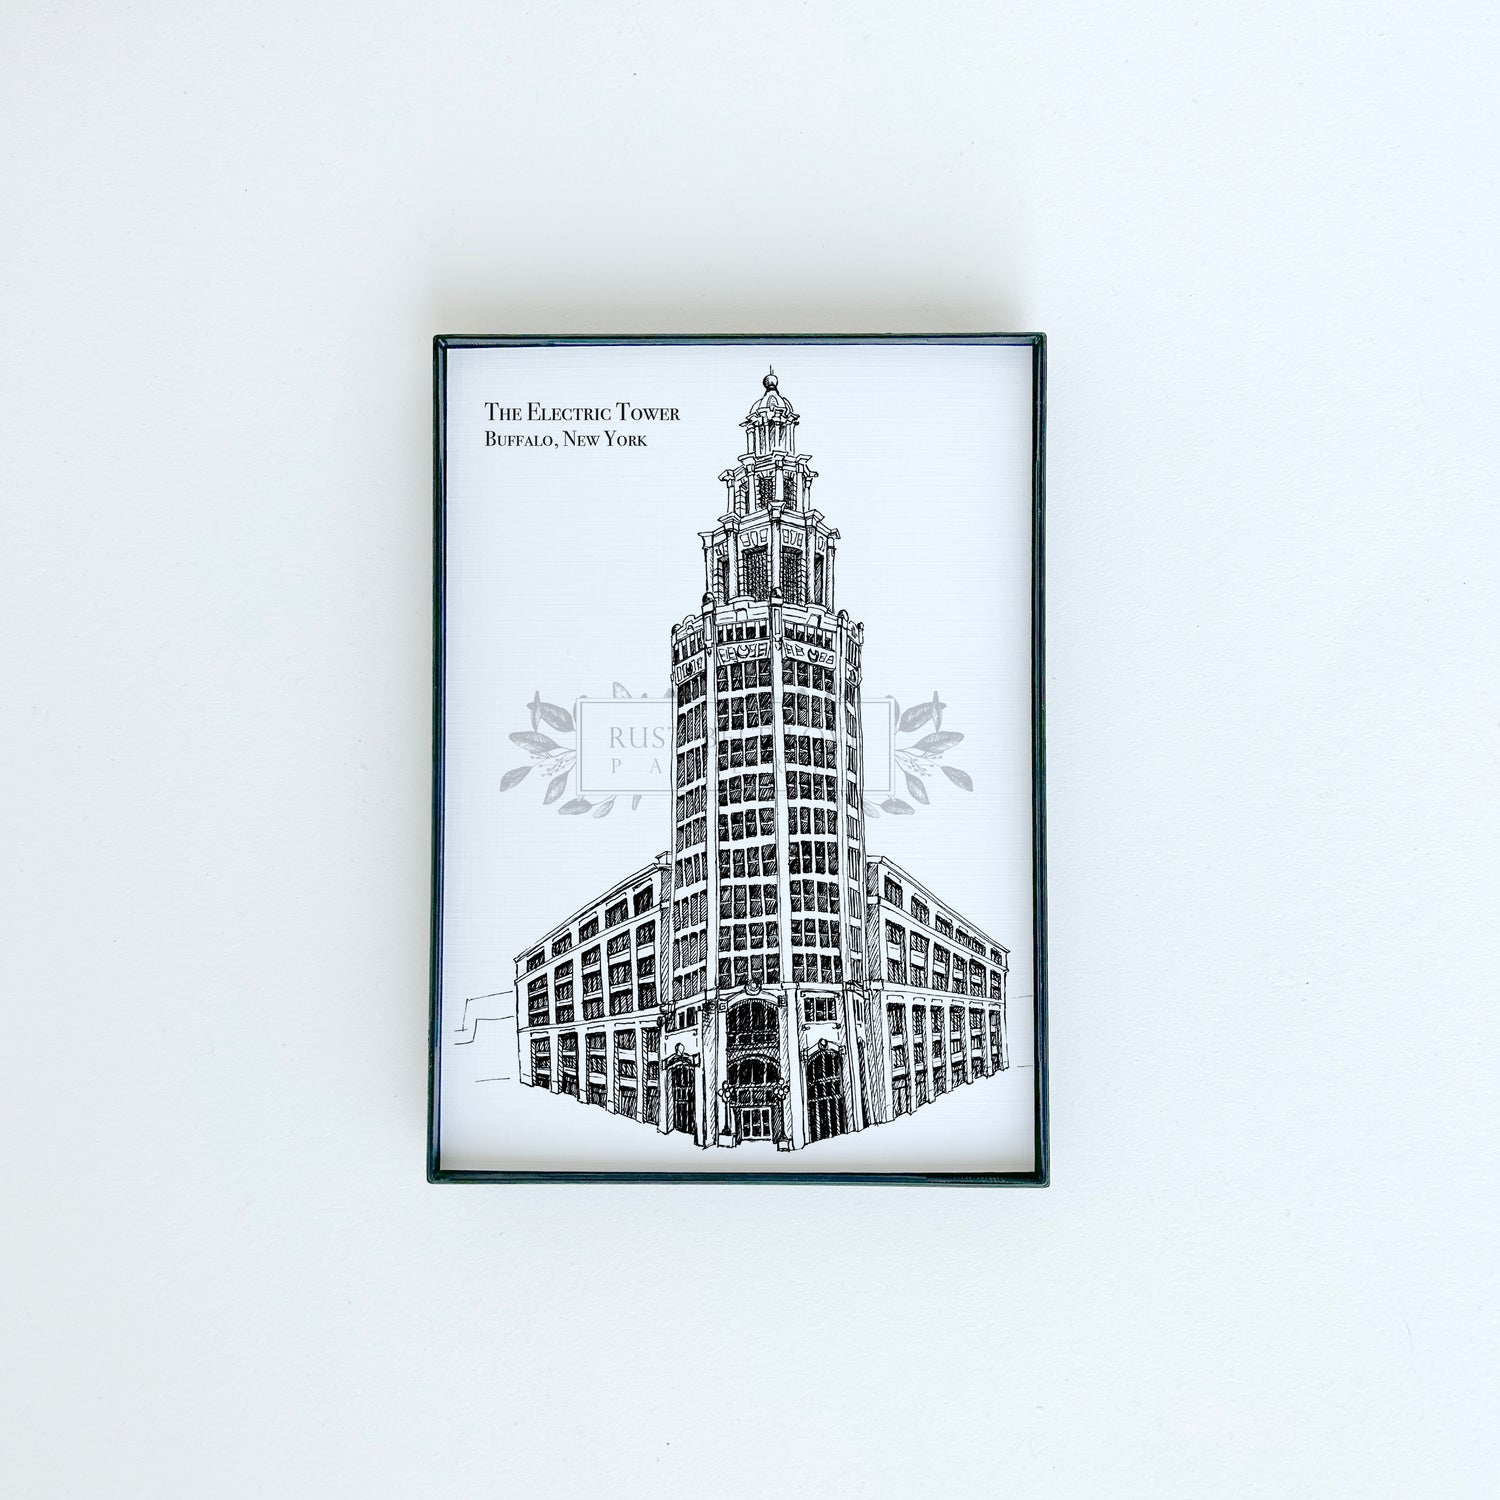 The Electric Tower illustration in black ink on white paper by Rust Belt Love